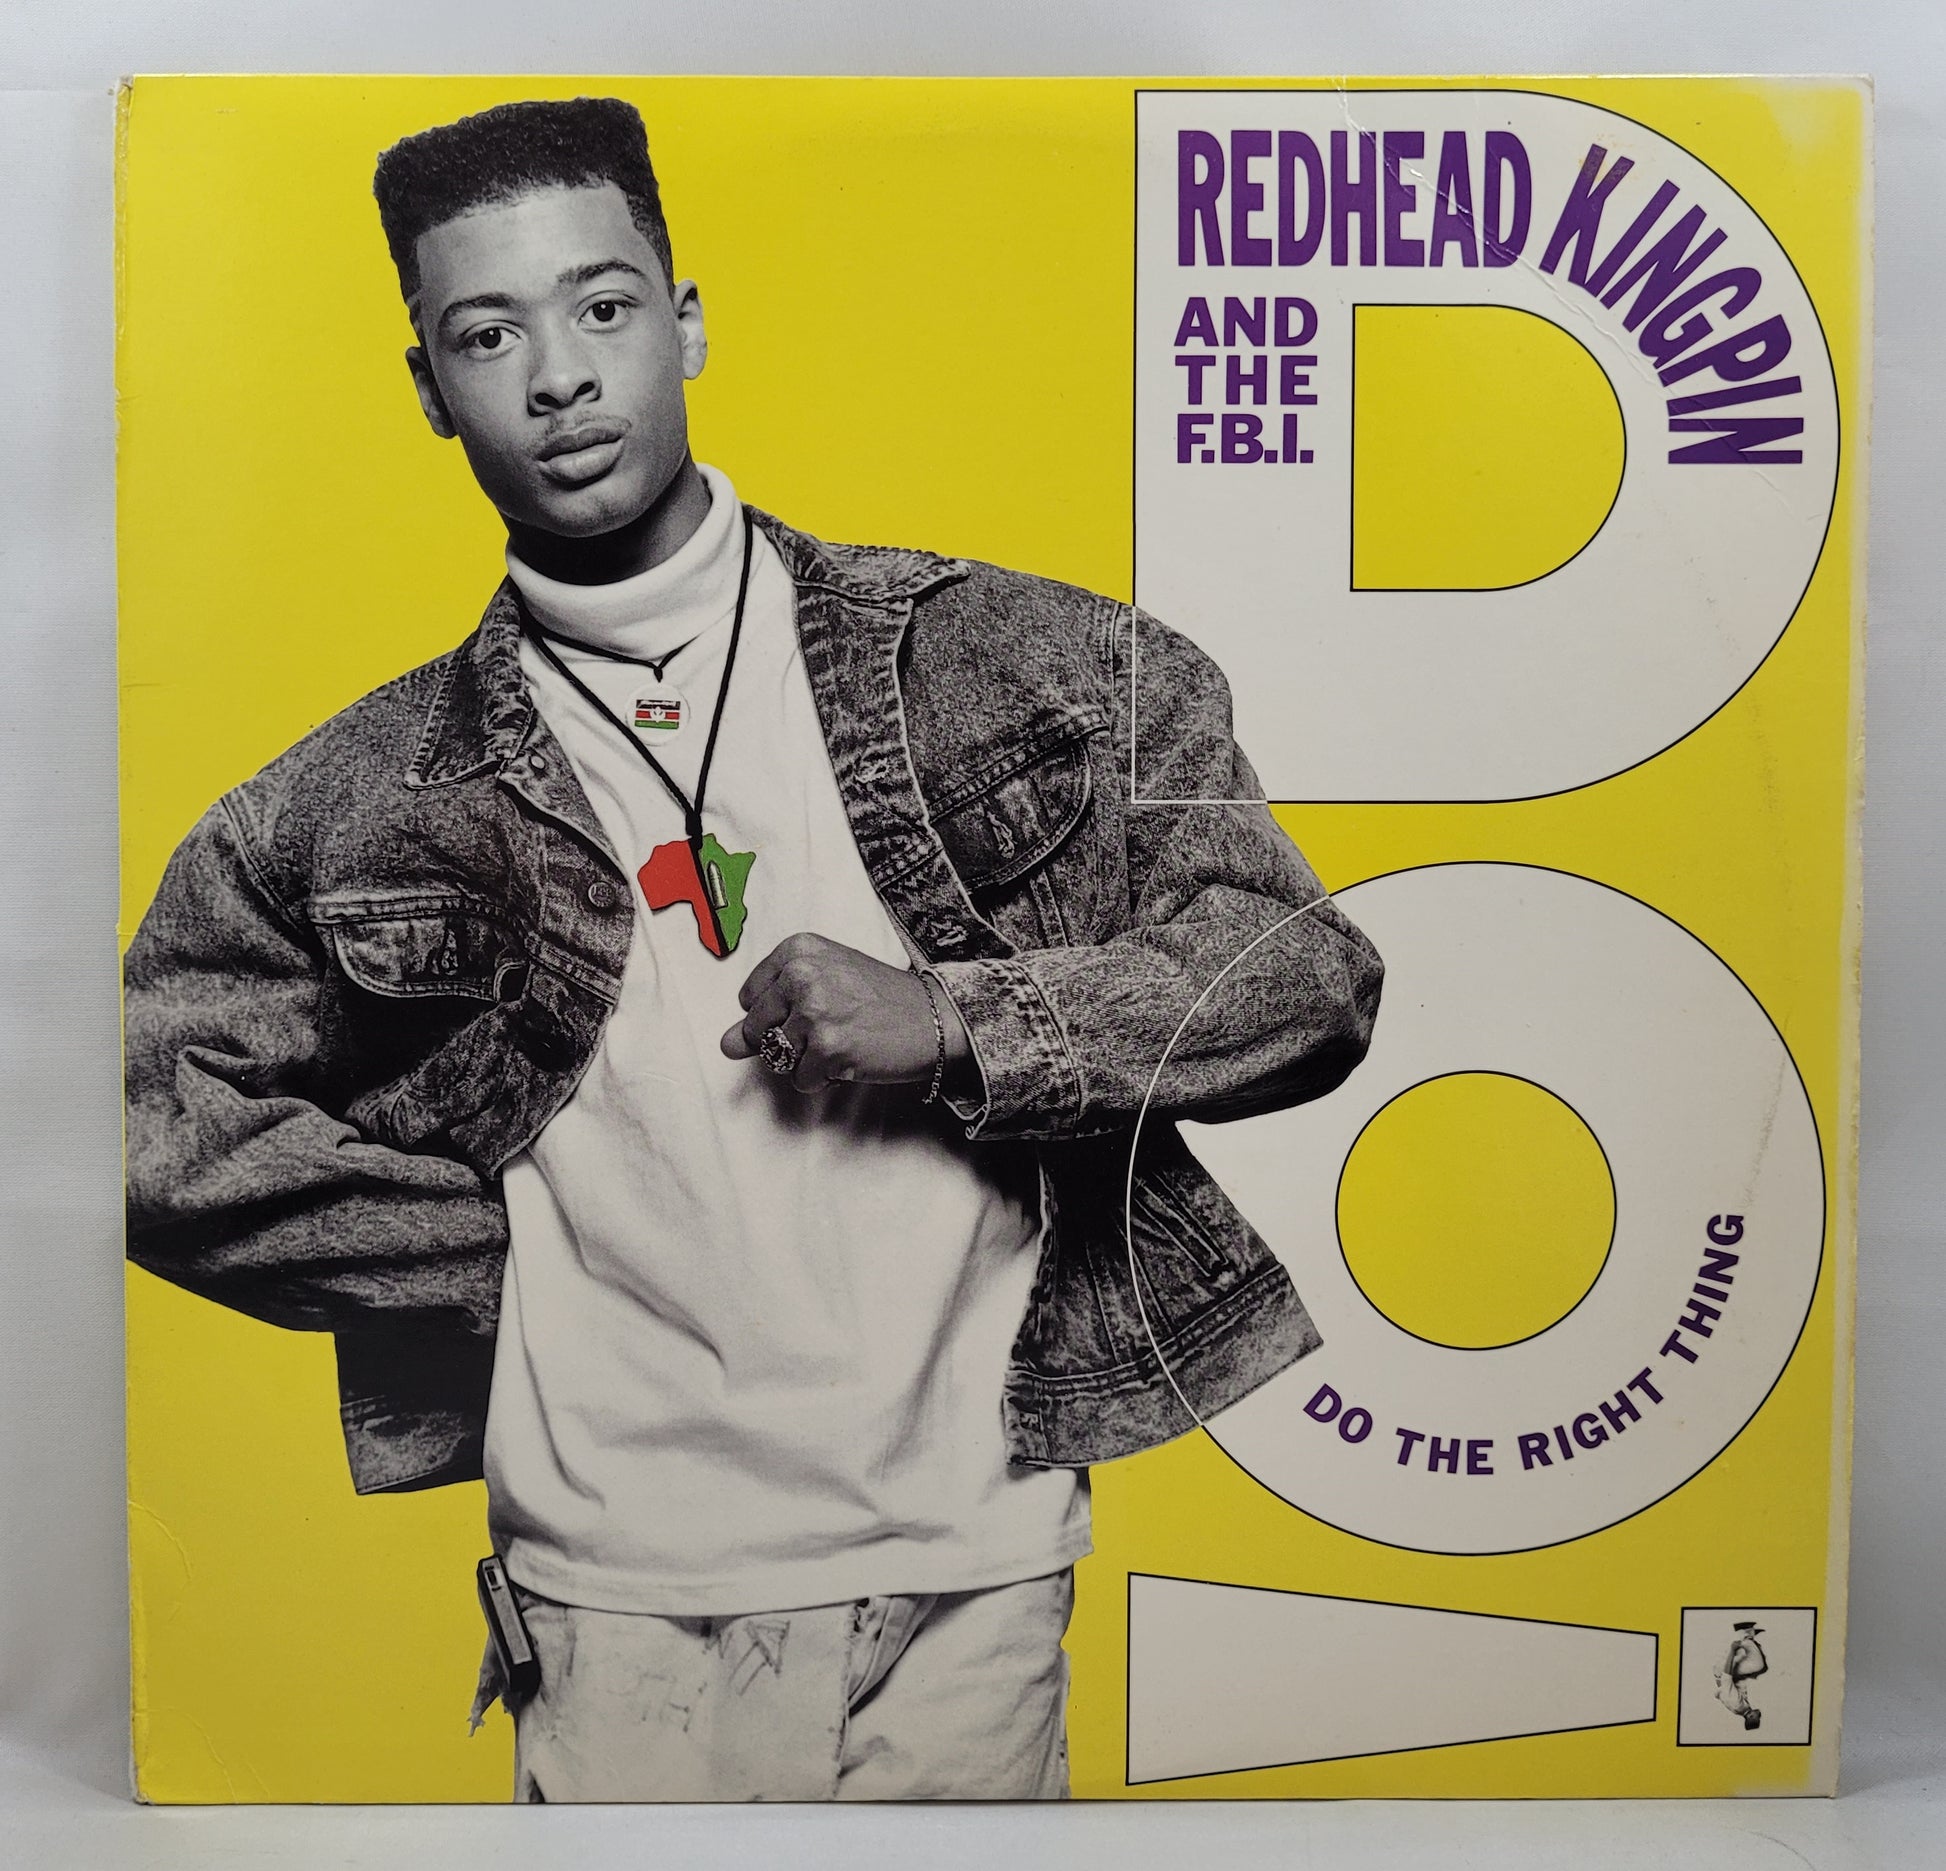 Redhead Kingpin and The F.B.I. - Do the Right Thing [1989 Used Vinyl Record 12" Single]